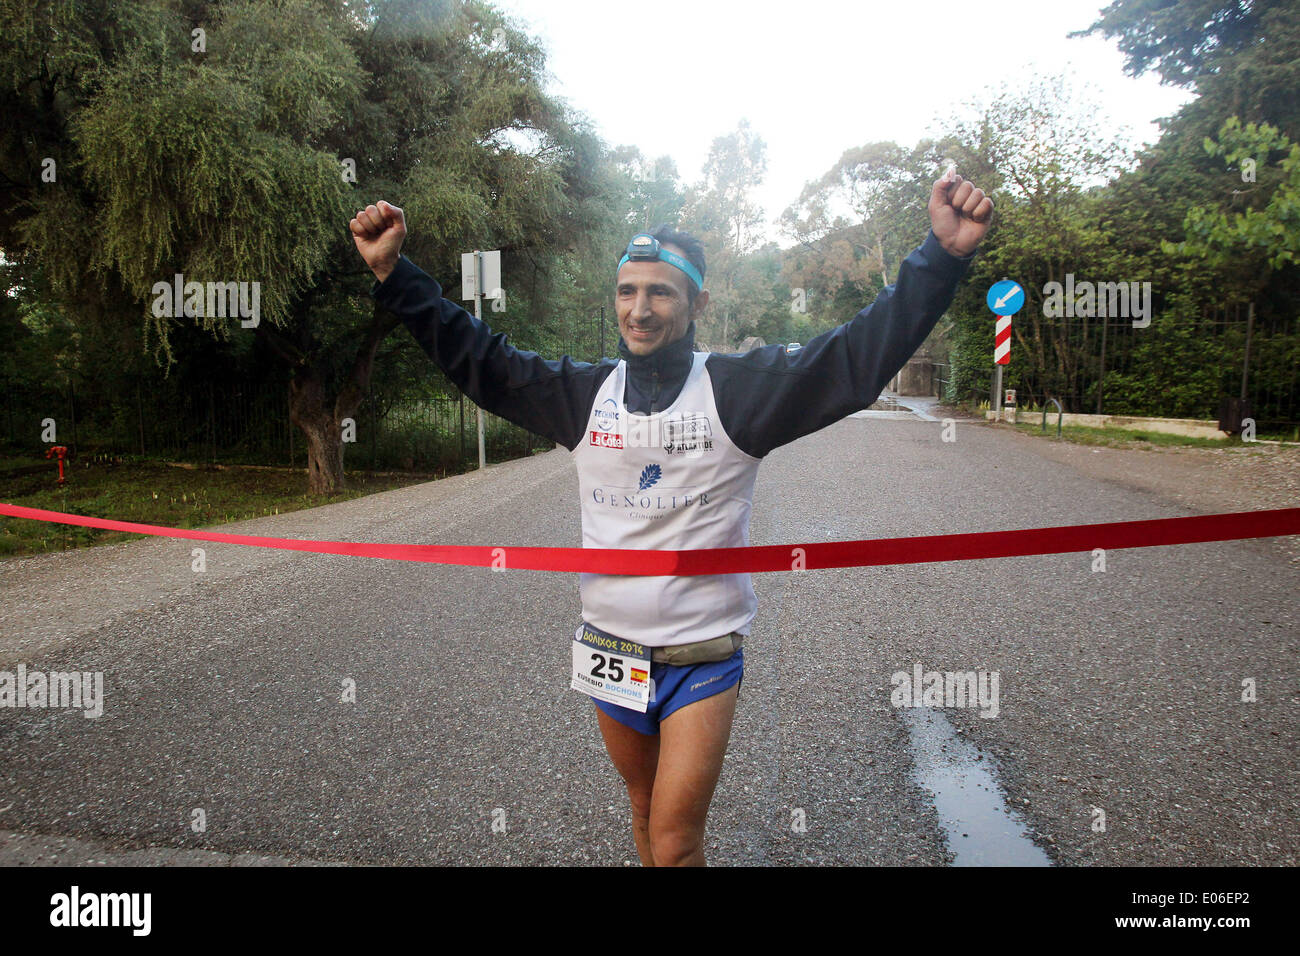 Athens, Greece. 4th May, 2014. Spanish athlete Eusebio Bochons reaches the finish line during the 3rd Dolichos Ultra Marathon in front of the archaeological site of Olympia, Greece, on May 4, 2014. A total of 26 athletes started on Friday running nonstop a 255 kilometers race from Delphi in mainland Greece to the birthplace of the Olympic Games. © Marios Lolos/Xinhua/Alamy Live News Stock Photo